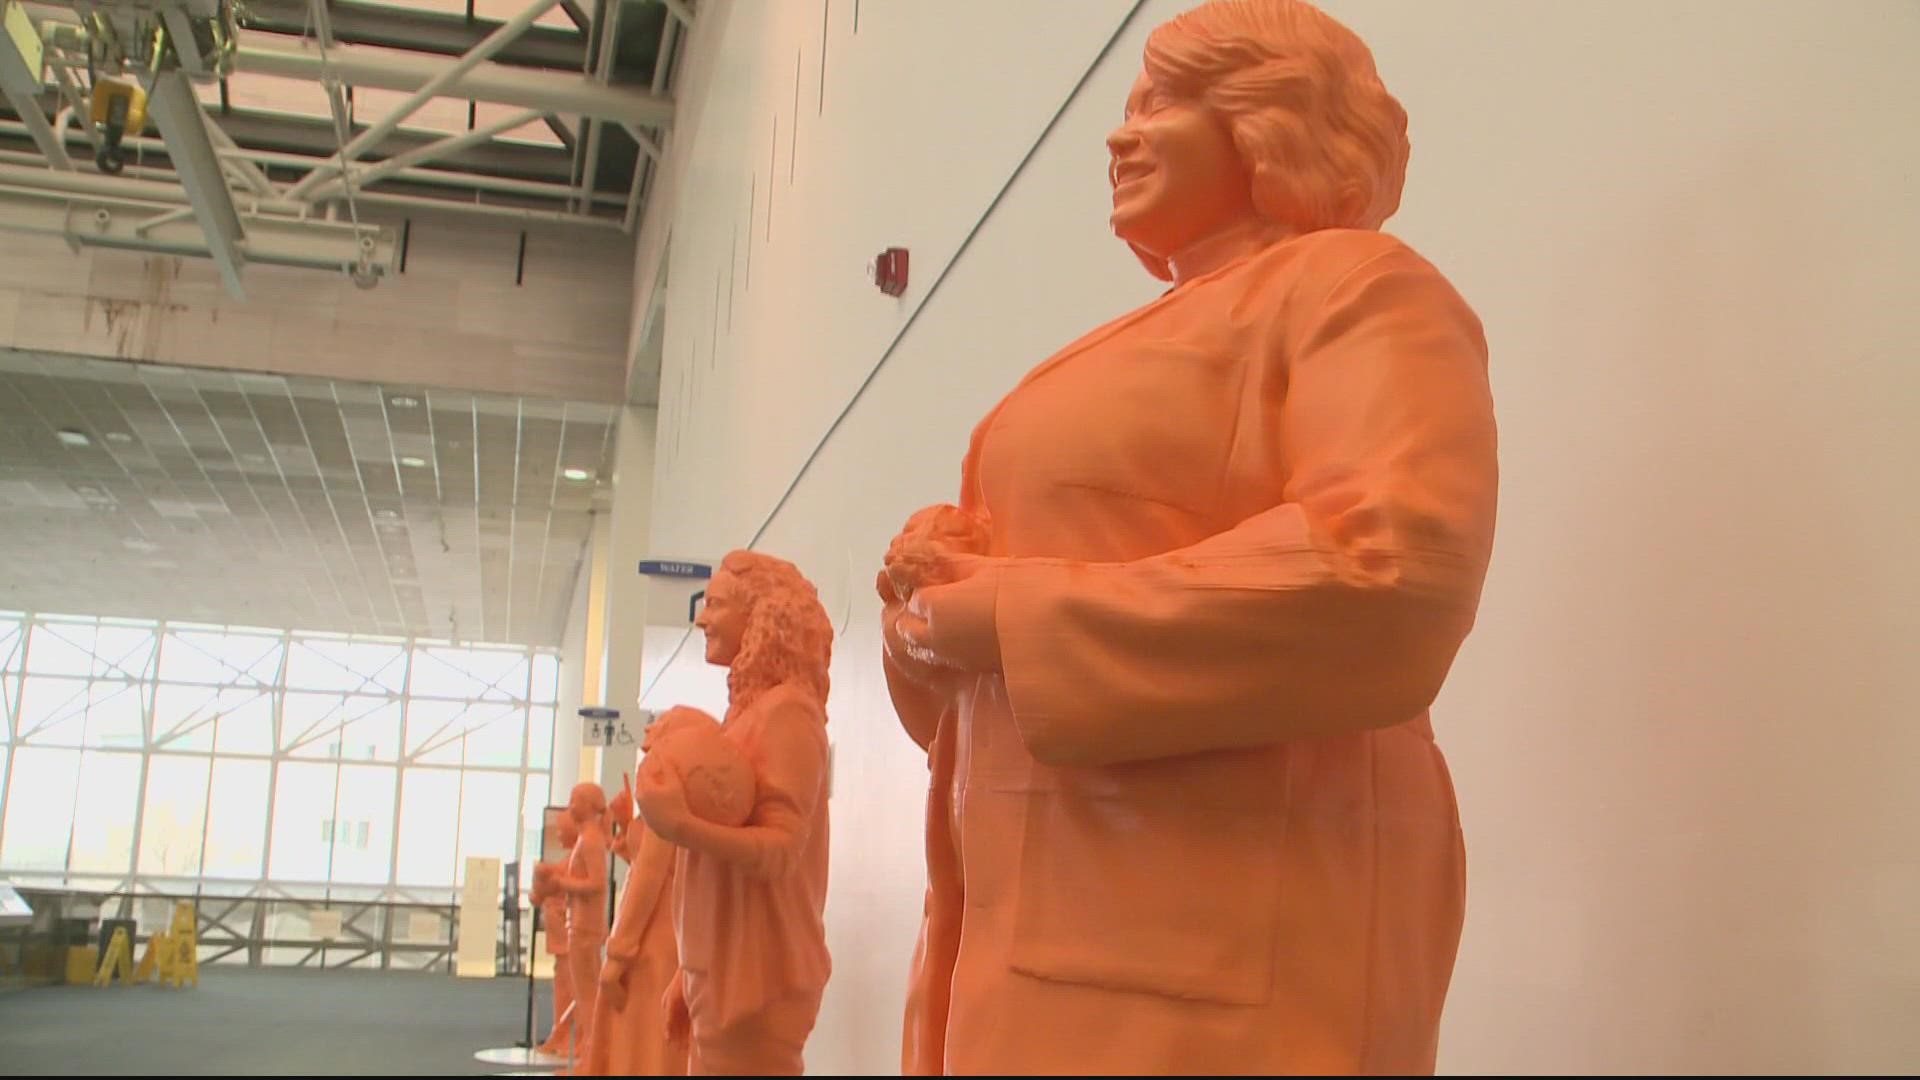 The largest collection of statues of women ever assembled features 120 life-size statues of STEM innovators.